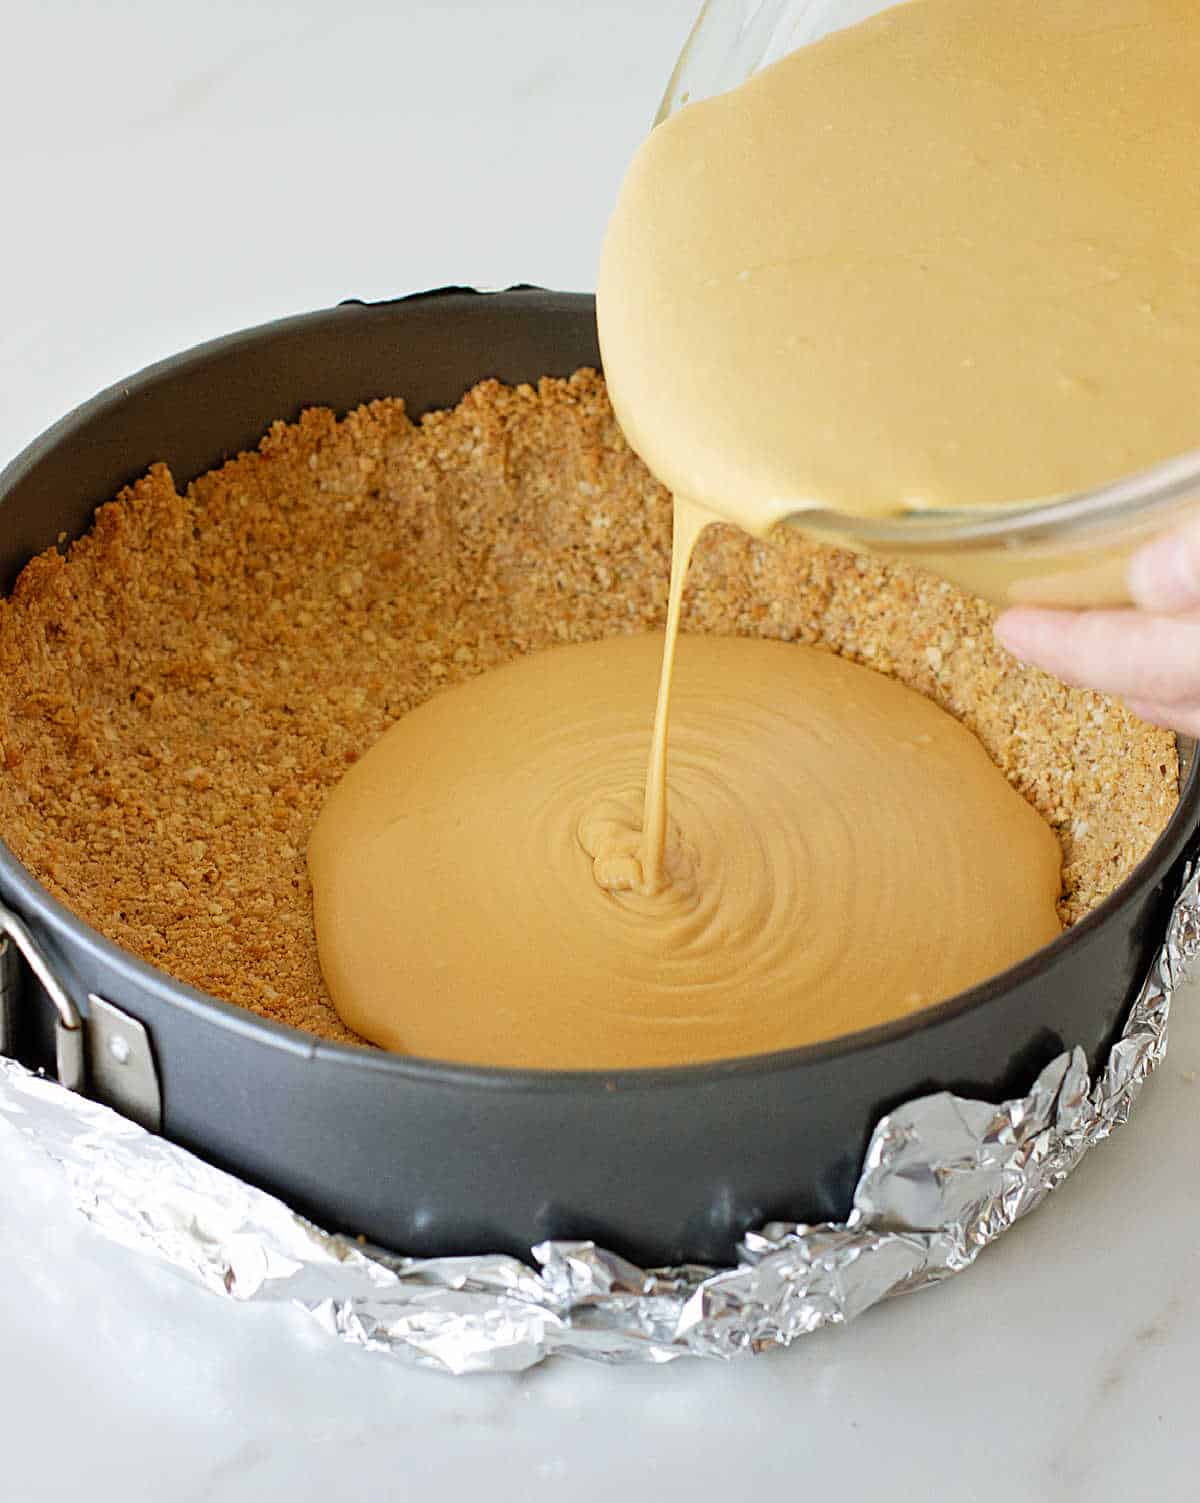 Pouring brown sugar cheesecake filling into crumb crust on a round cake pan with aluminum foil in the bottom. White surface and background.